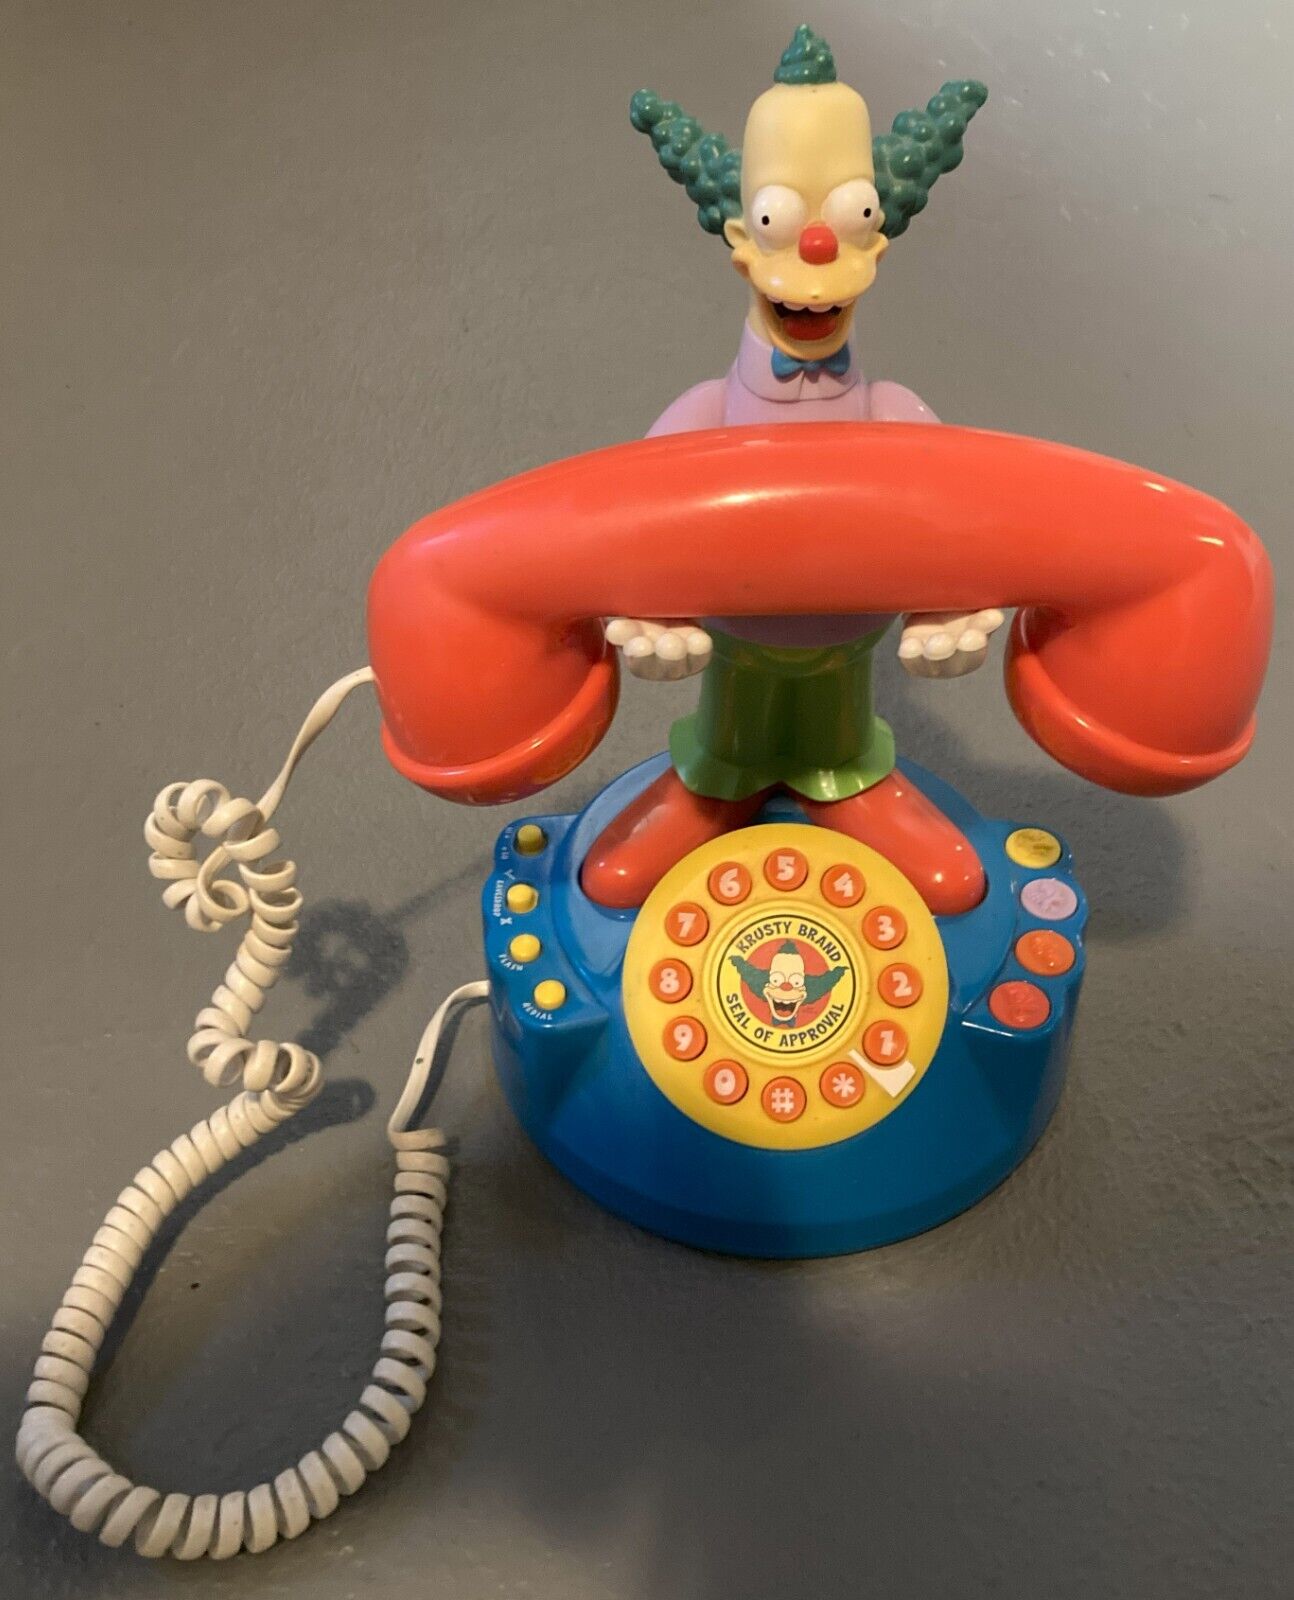 Krusty Prankster Phone 2002 THE SIMPSONS Telephone WORKS VERY HARD TO FIND